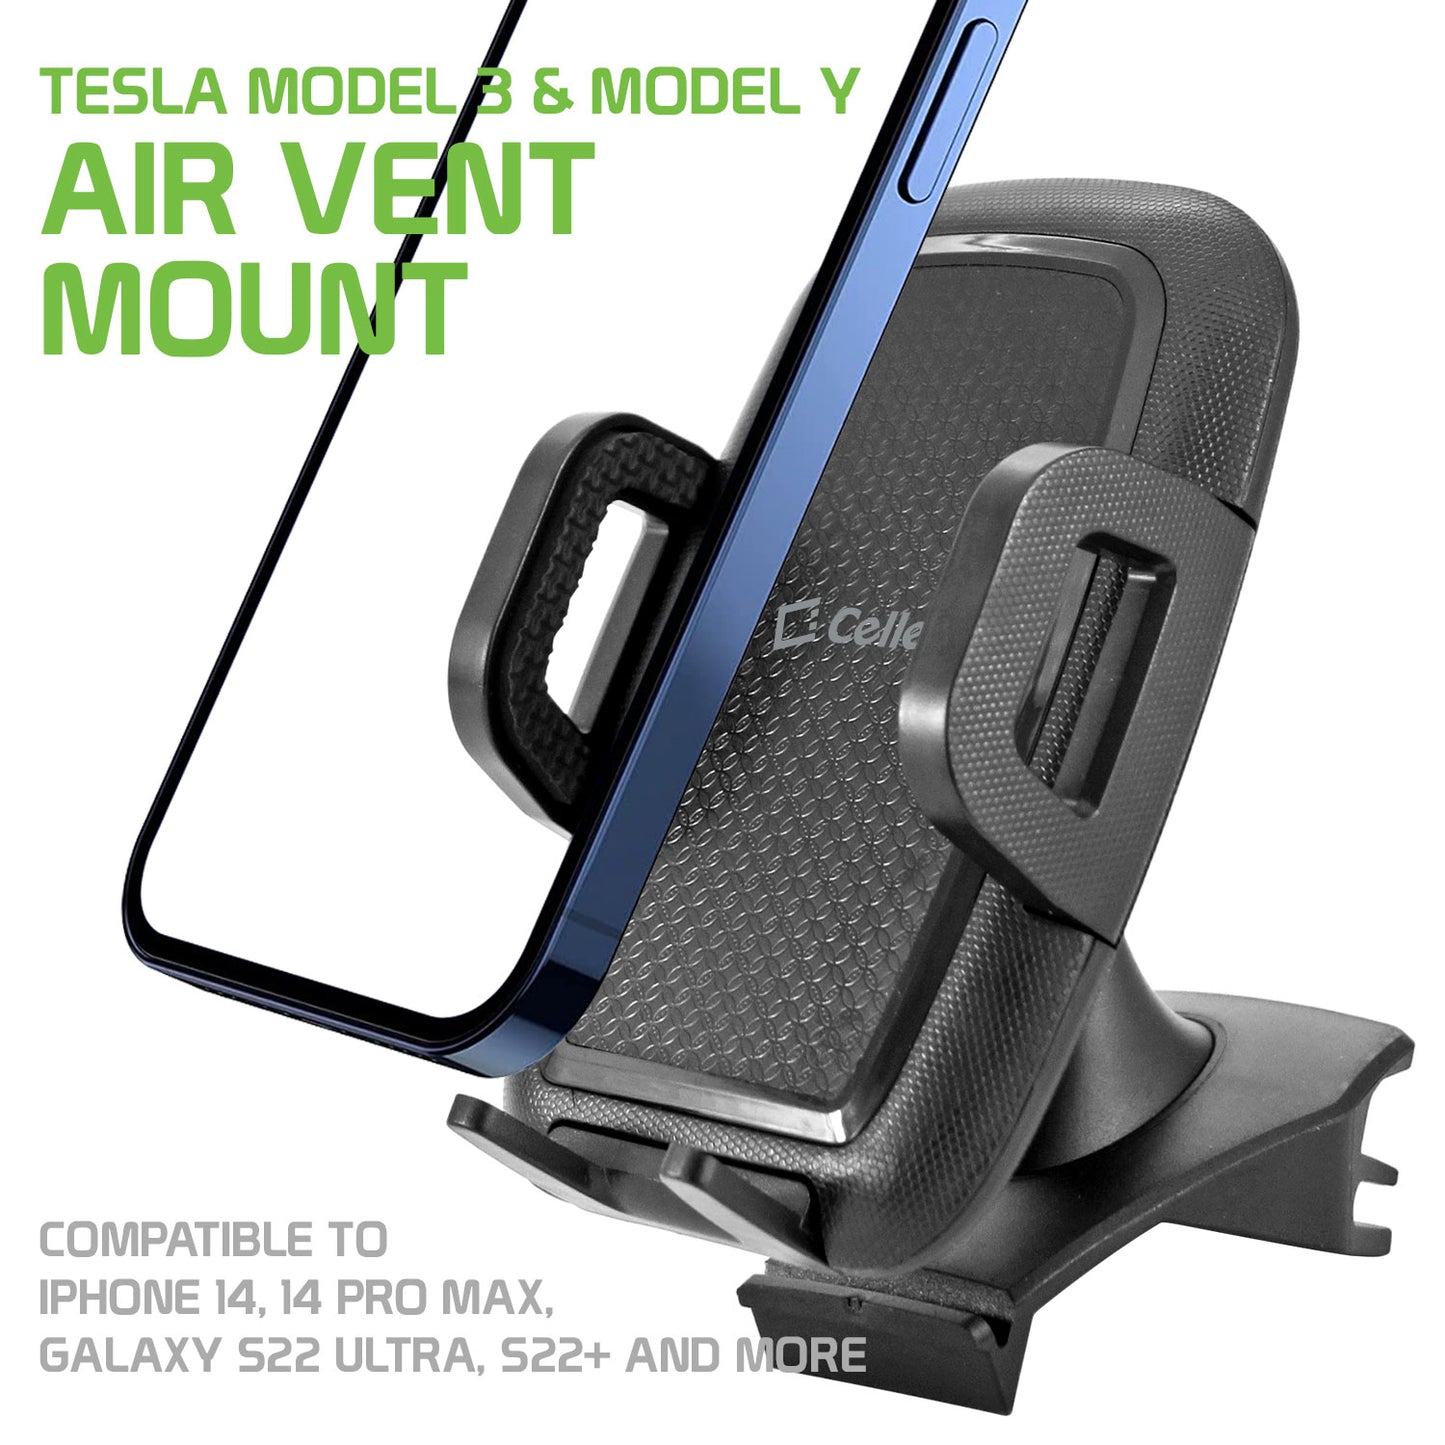 Air Vent Mount for Tesla Model 3 & Model Y Compatible to iPhone 14, 14 Pro Max, Galaxy S22 Ultra, S22+ and More